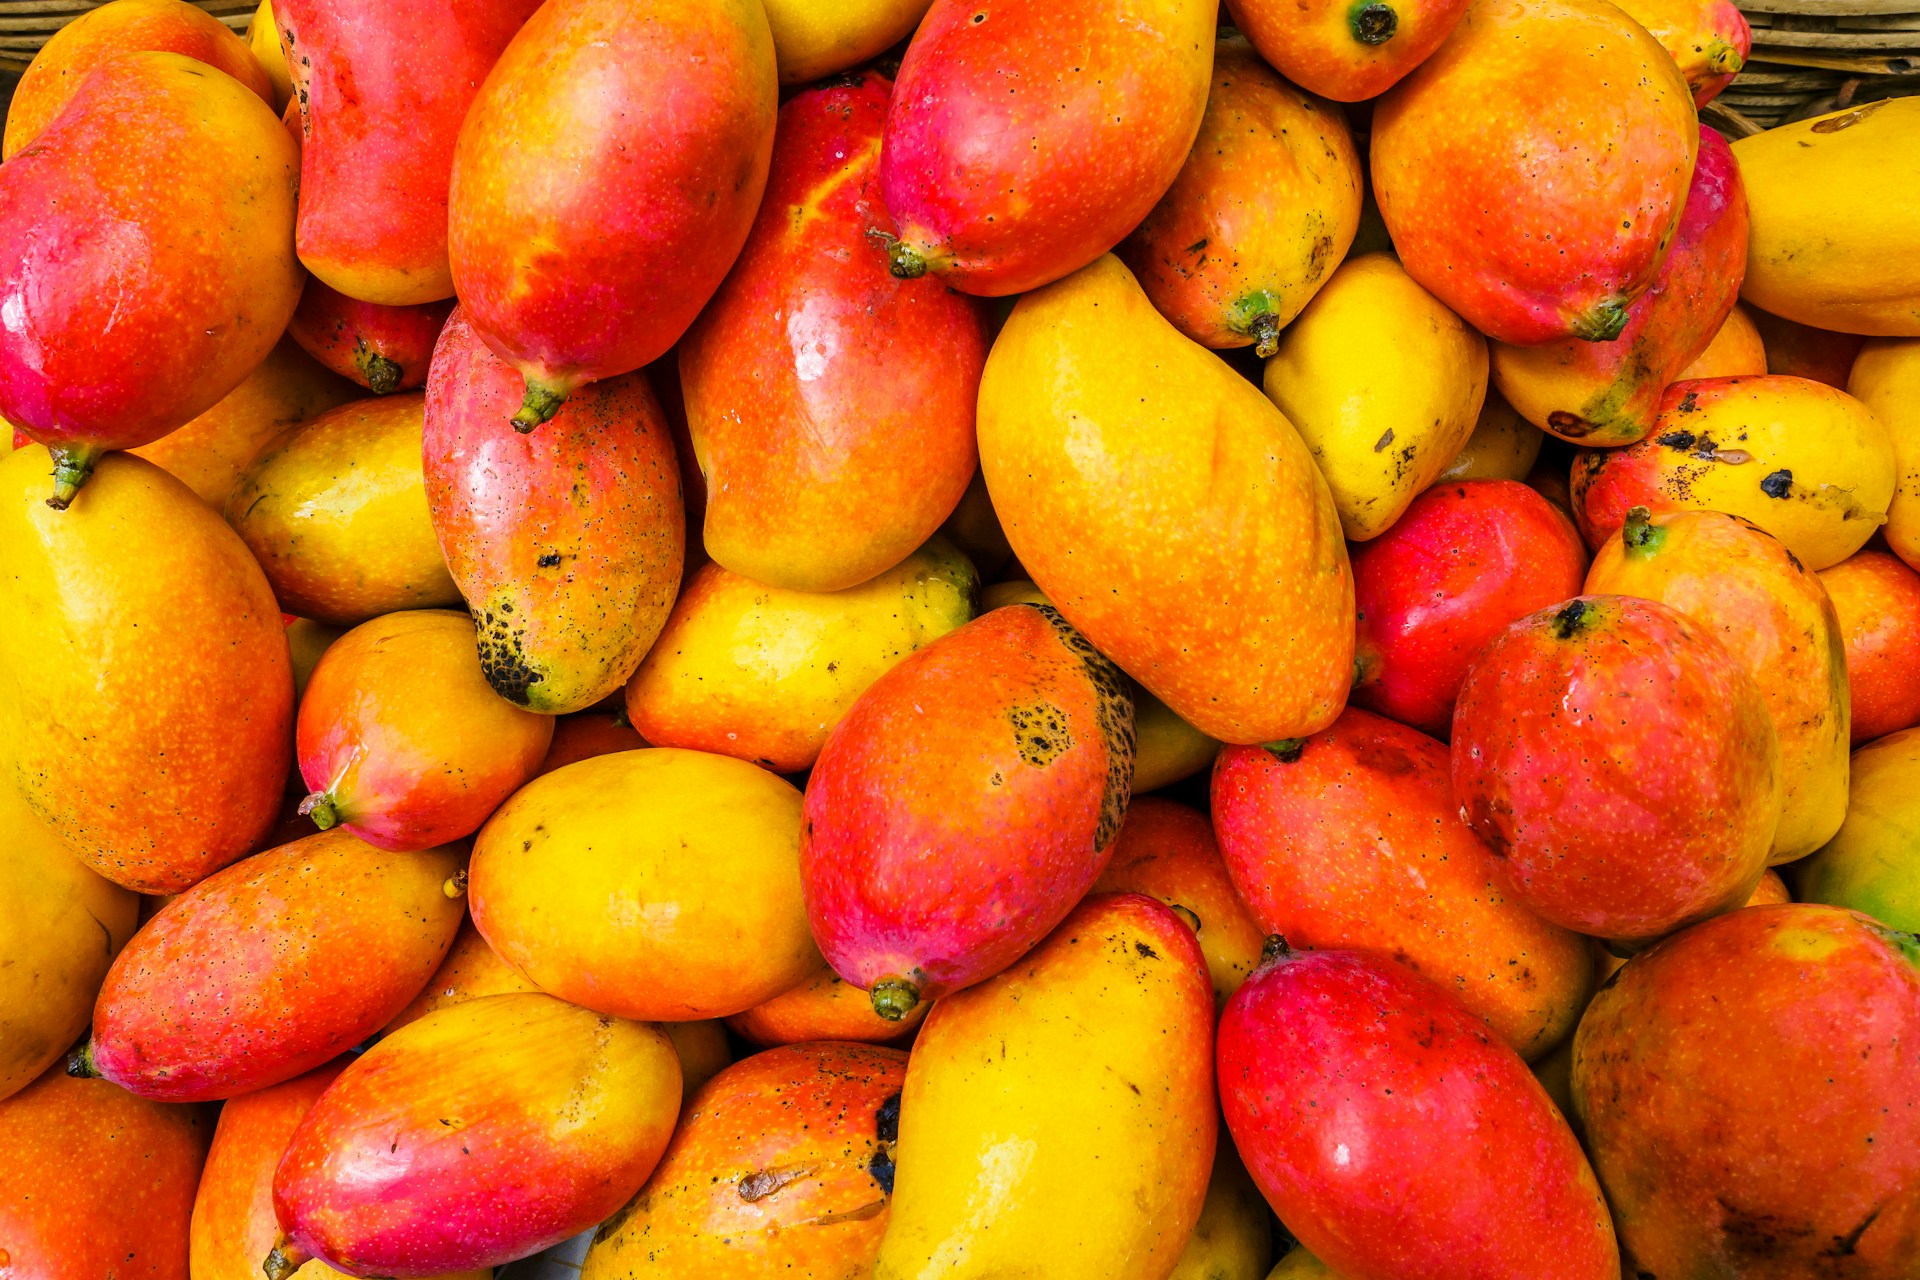 A pile of mangoes